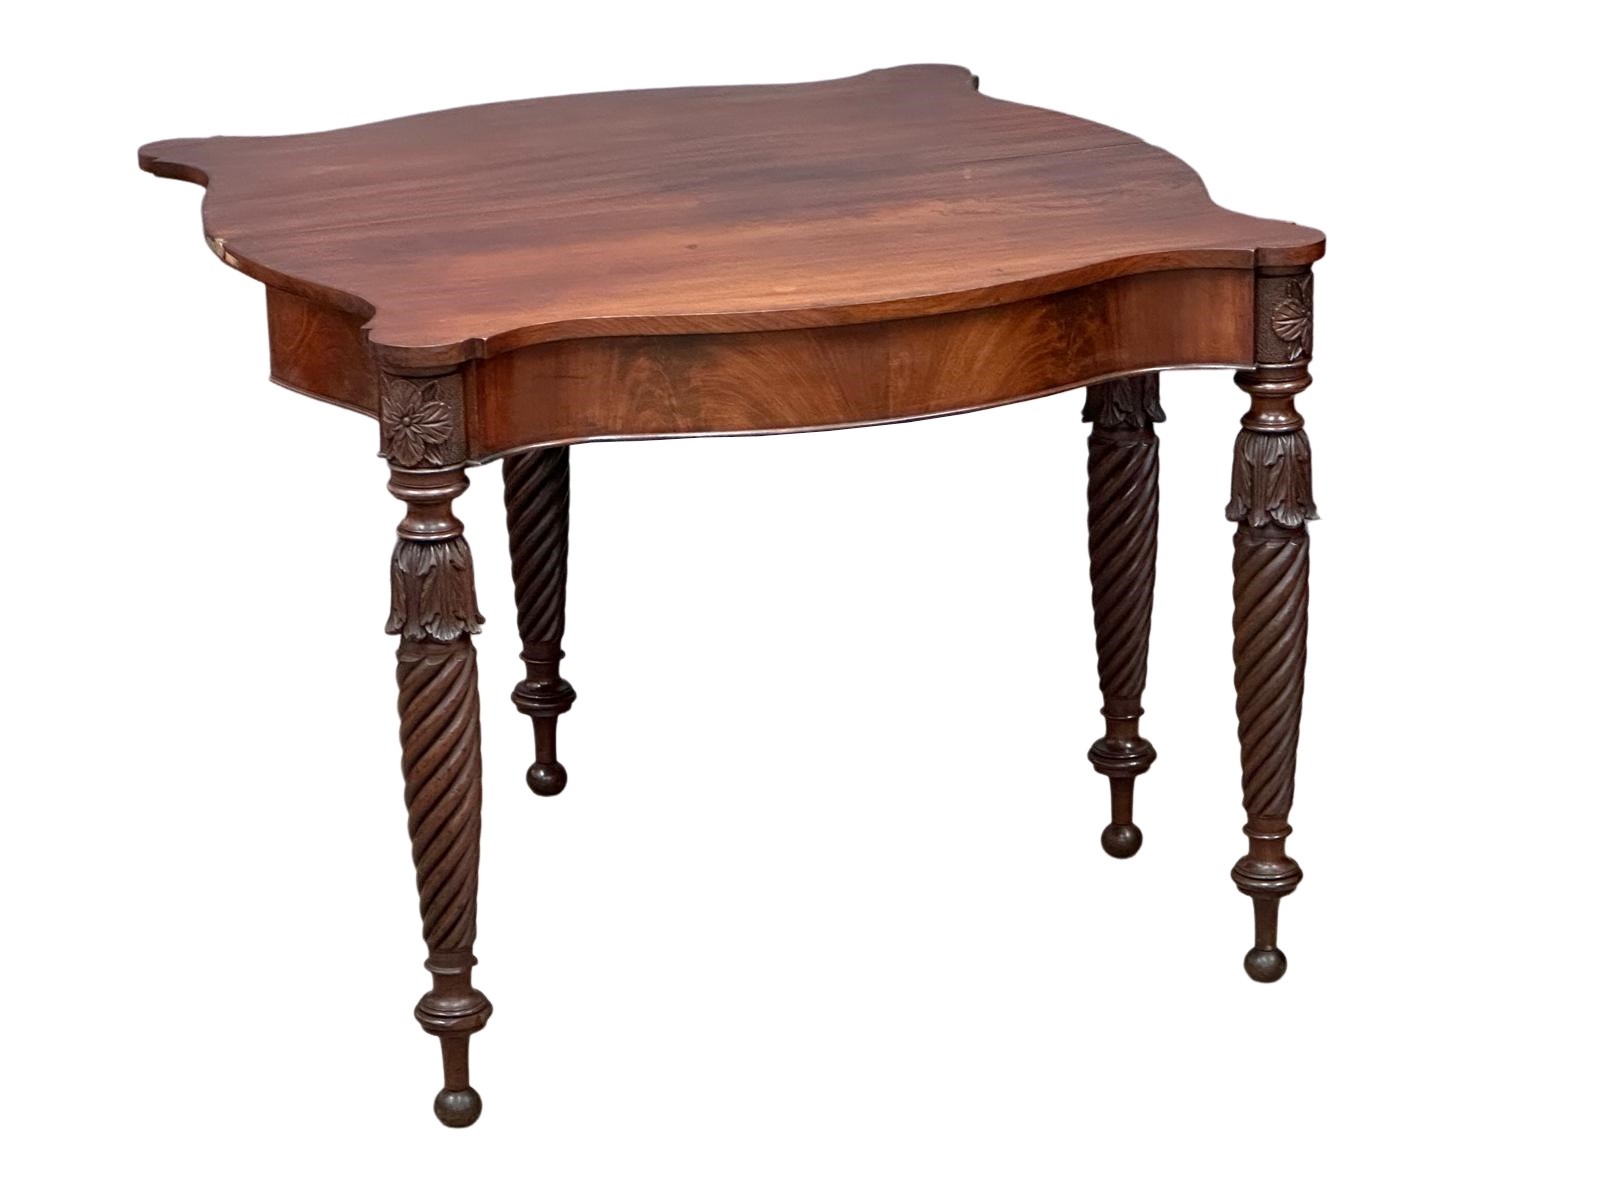 A William IV mahogany serpentine front turnover tea table on turned legs. Circa 1830. 87x44x75cm - Image 3 of 9